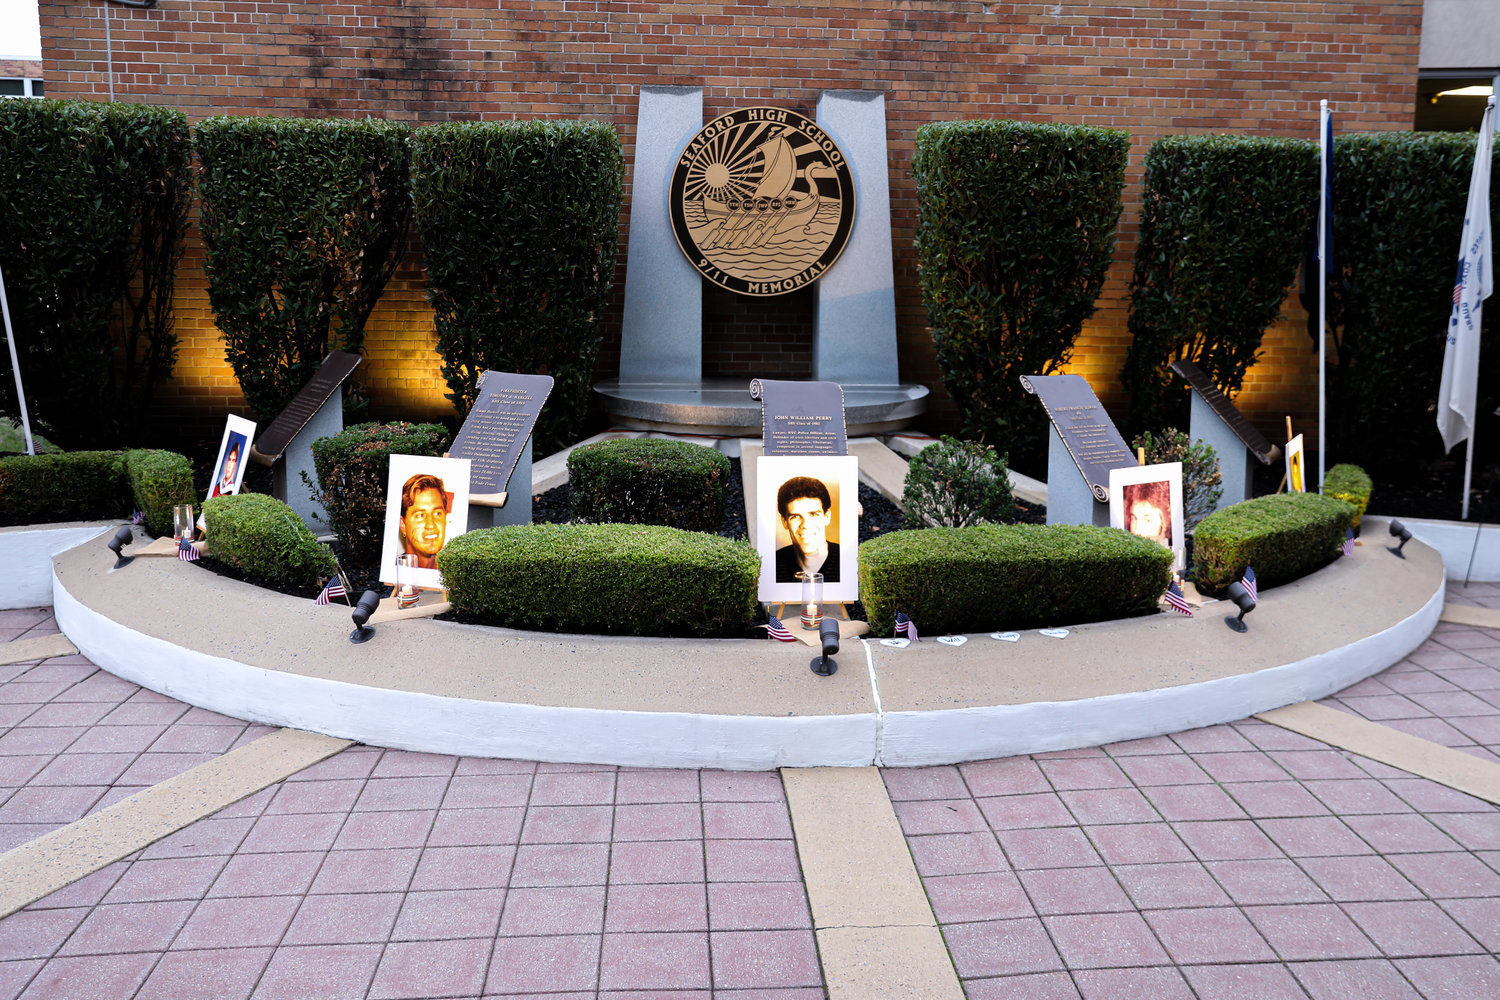 The Seaford 9/11 Memorial to its five heroes, located at the high school so that Seaford kids will never forget.